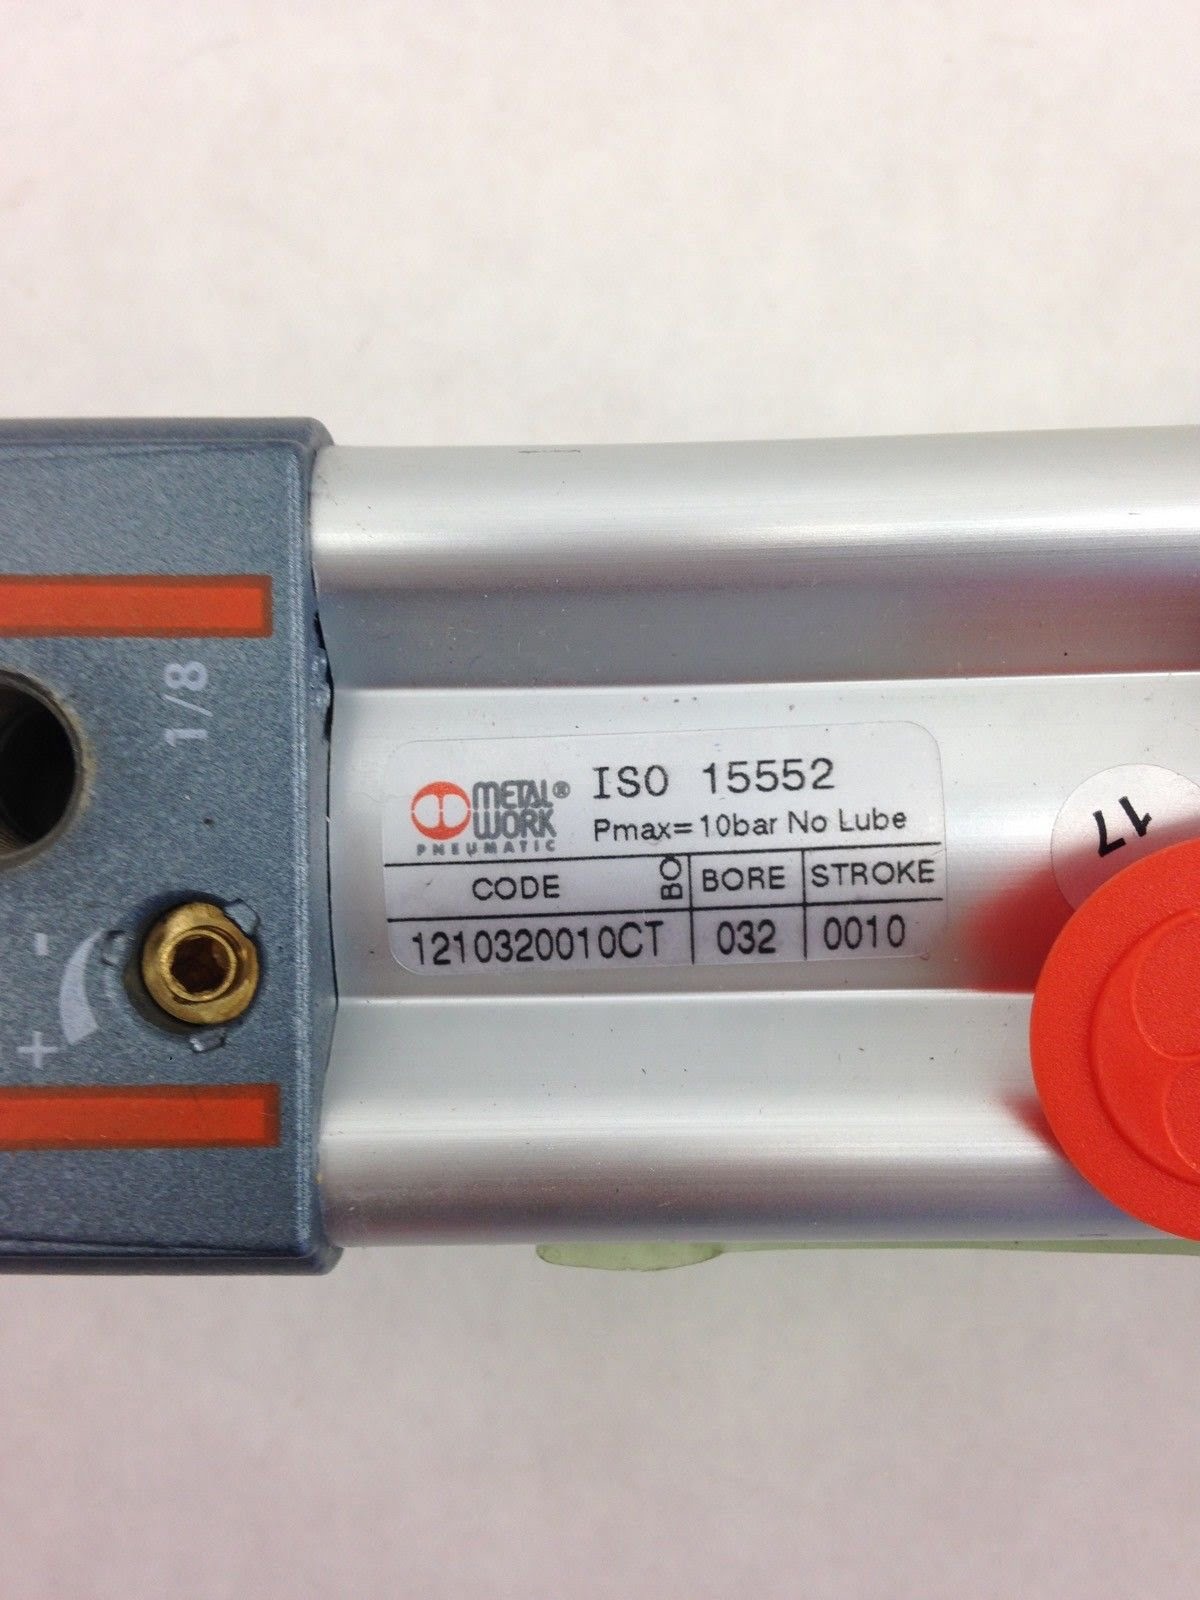 0010 stroke A803 METAL WORK® PNEUMATIC 1210320010CT  AIR CYLINDER  032 bore 